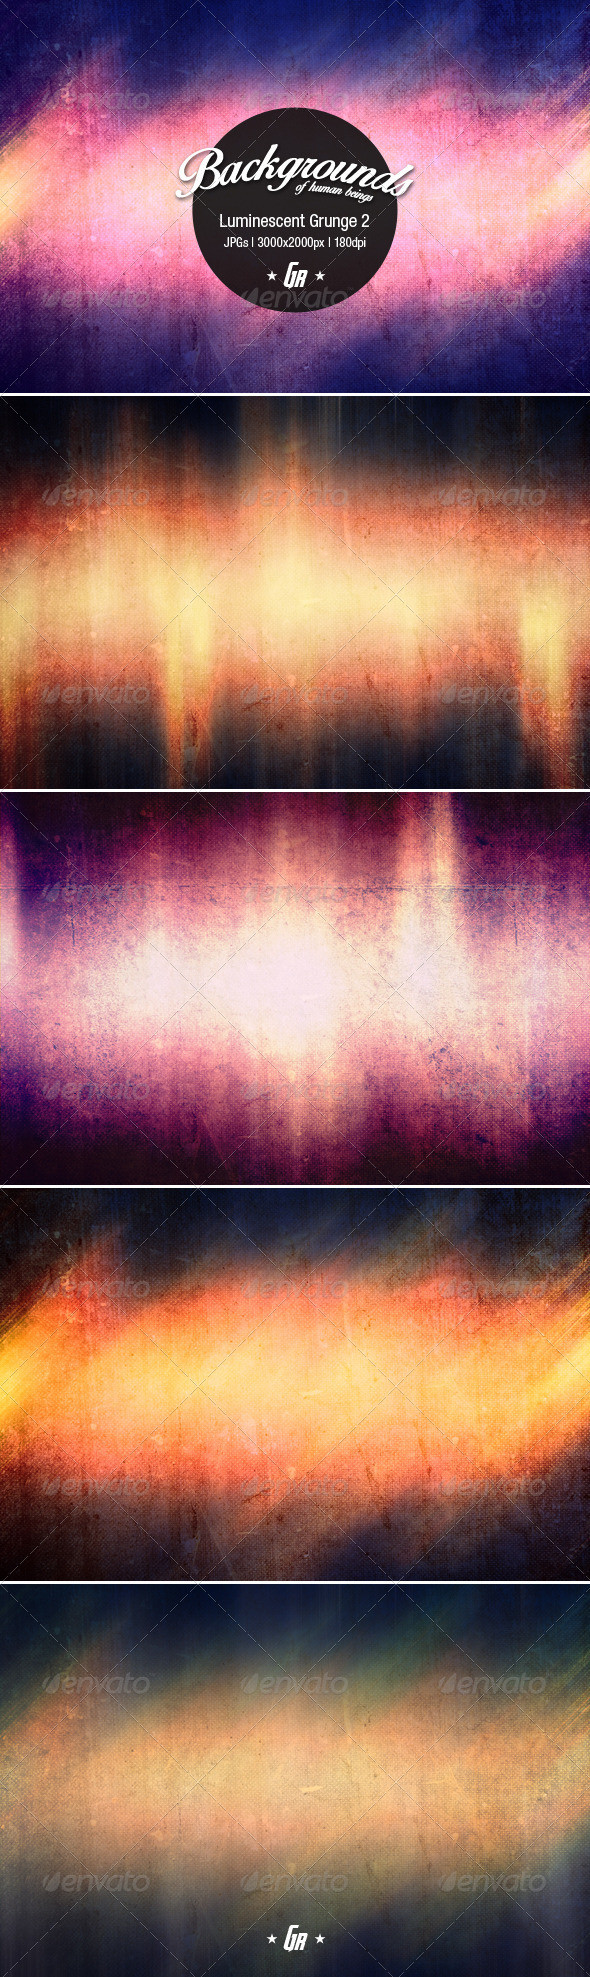 Luminescent grunge backgrounds2 preview